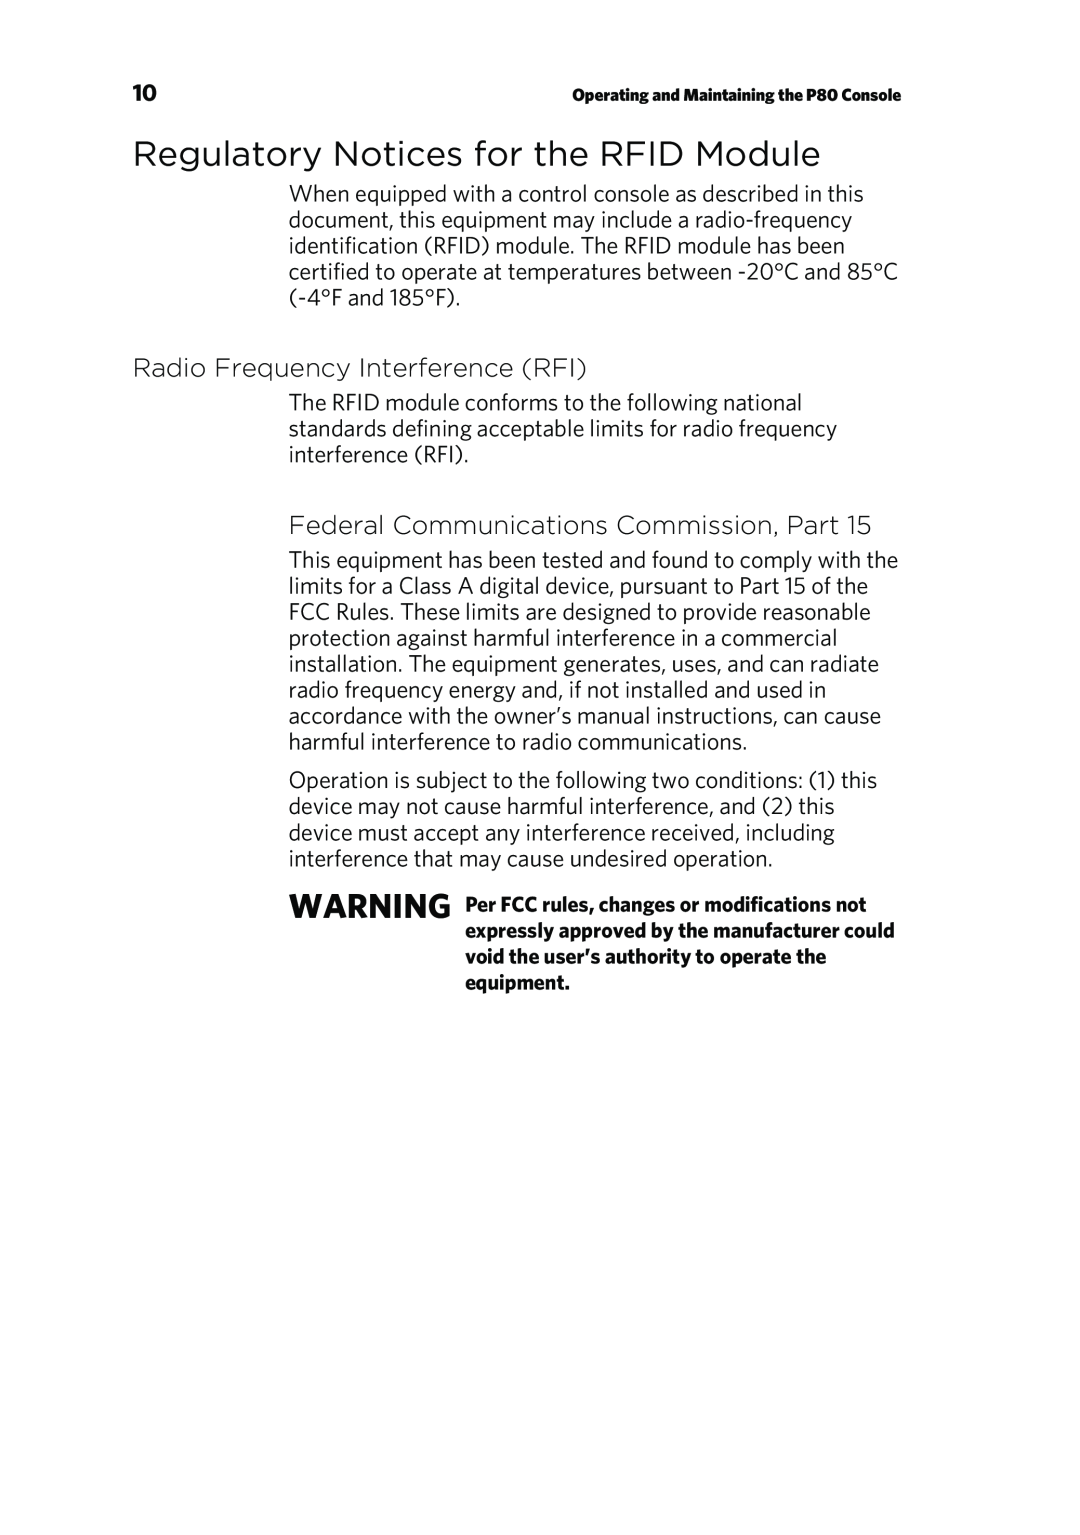 Precor P80 manual Regulatory Notices for the RFID Module, Radio Frequency Interference RFI 